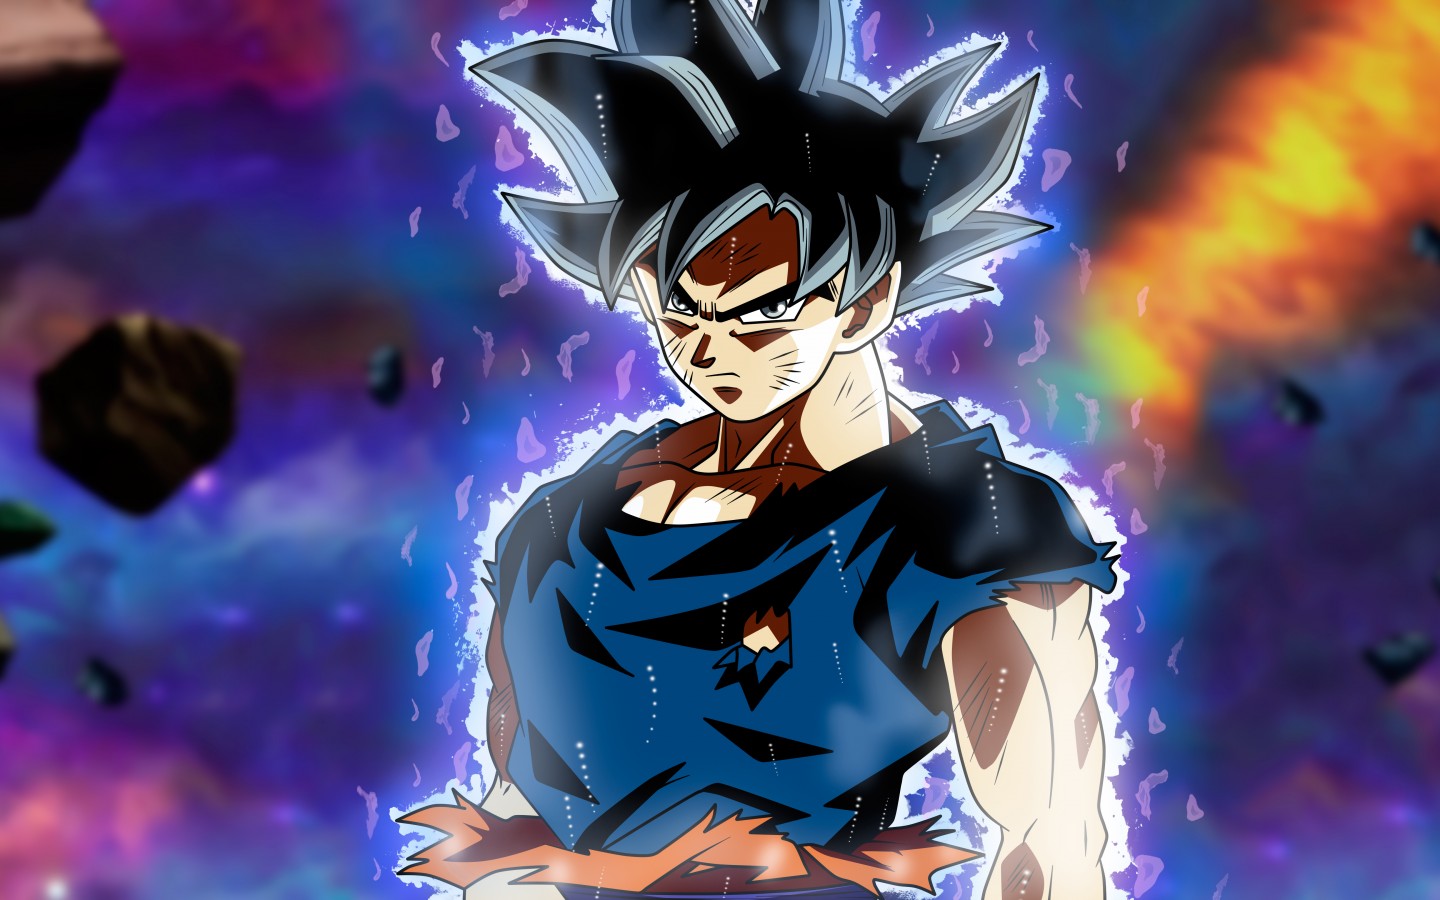 Top 10 Best Dragonball Wallpapers Hd (Updated With Dragonball Super  Wallpapers) - HubPages